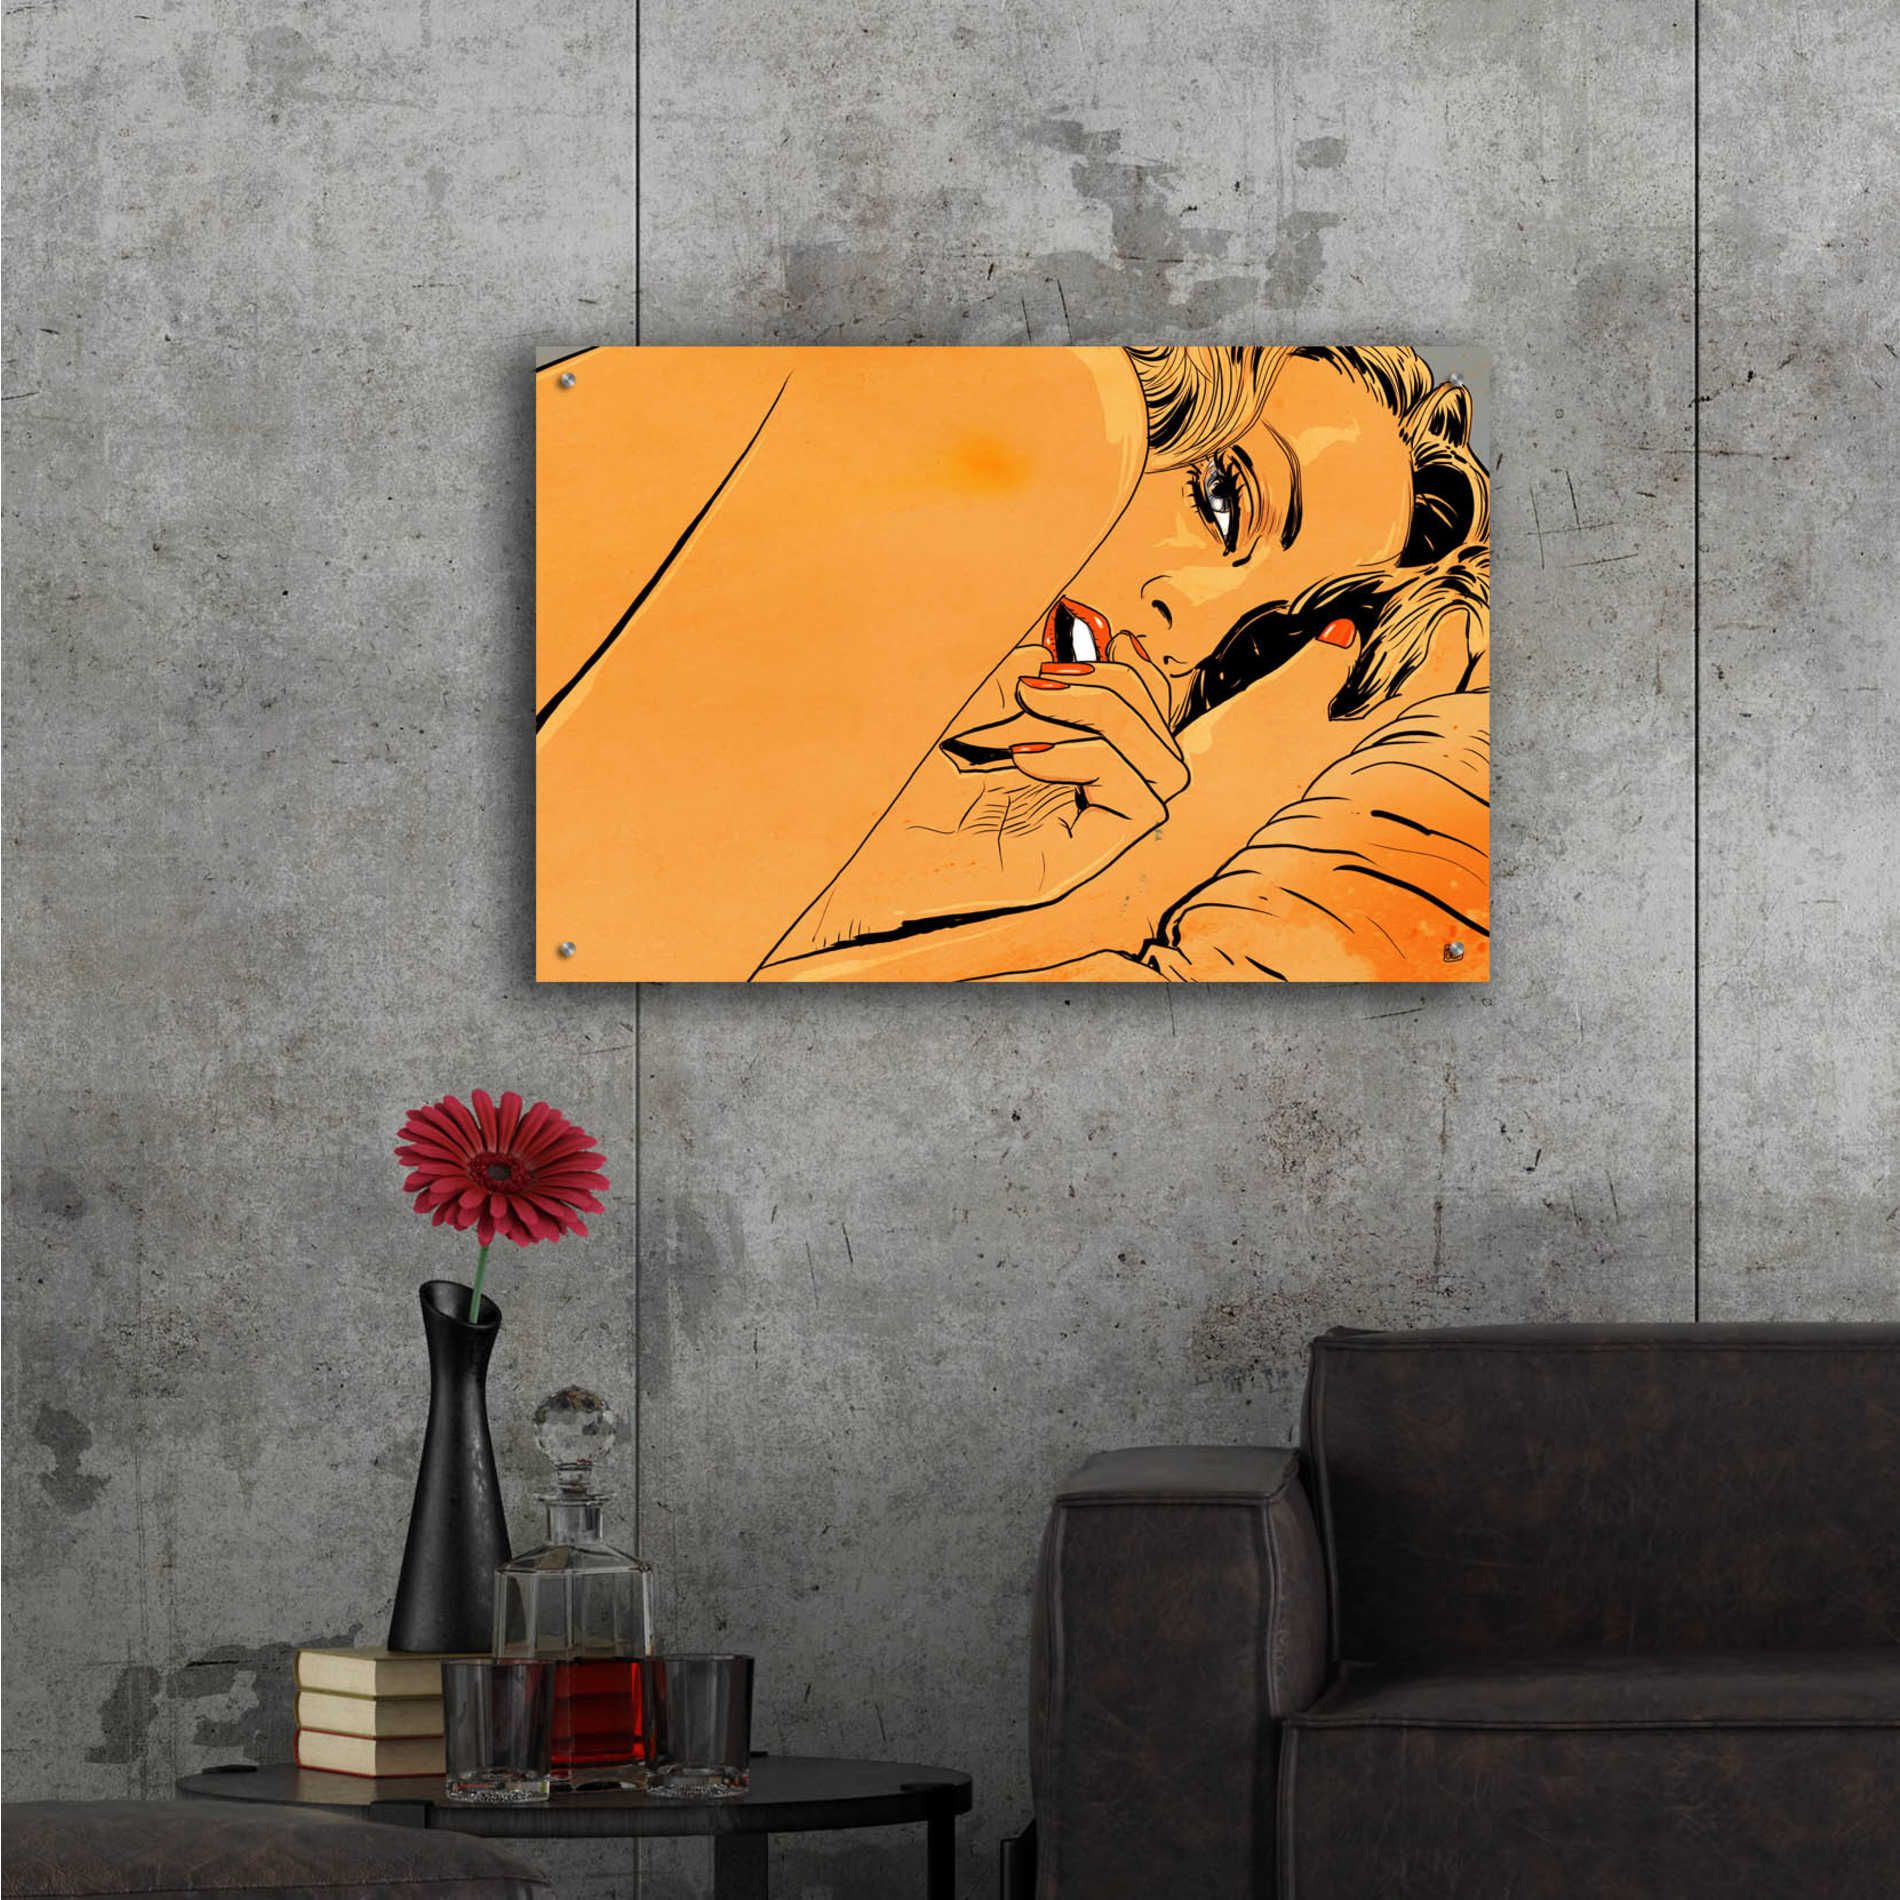 Epic Art 'Girl in bed 1' by Giuseppe Cristiano, Acrylic Glass Wall Art,36x24